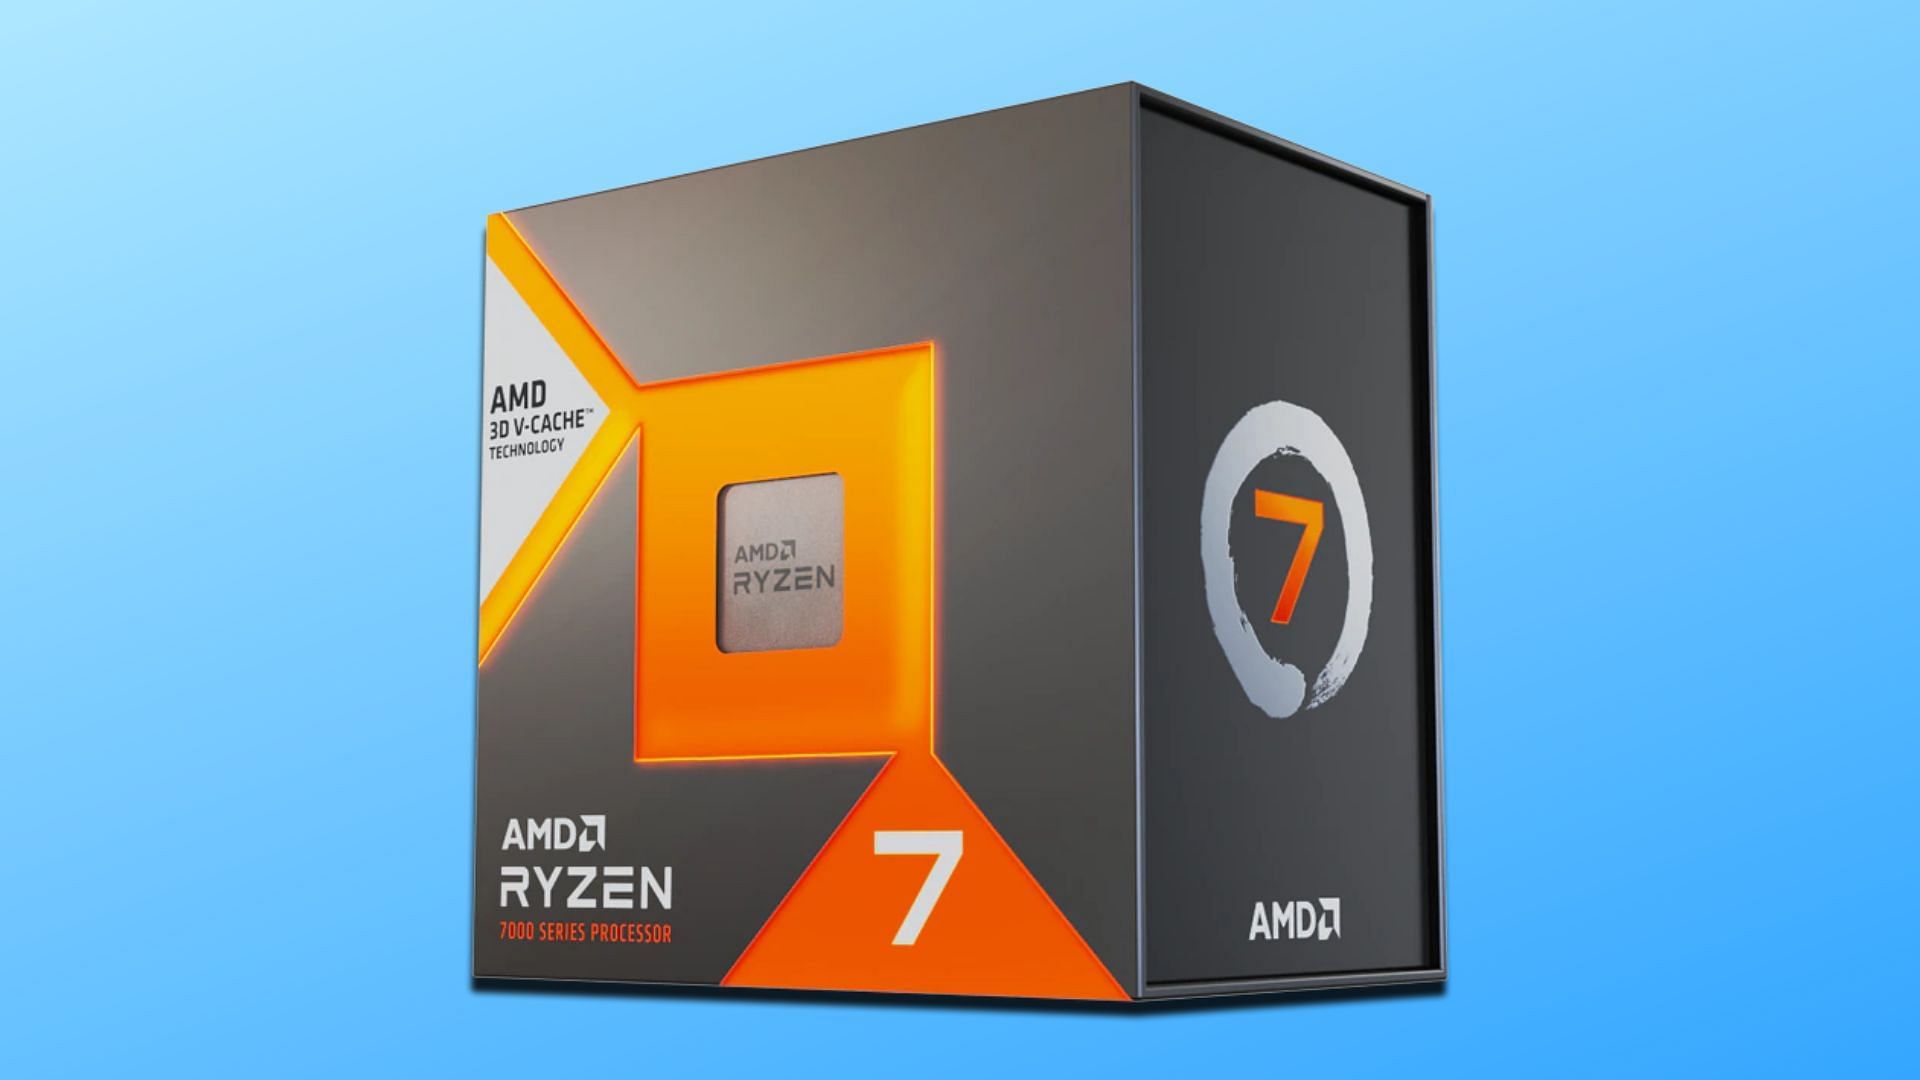 Review: AMD Ryzen 7800X3D is the cheapest way to get the most out of a  $1,500 GPU